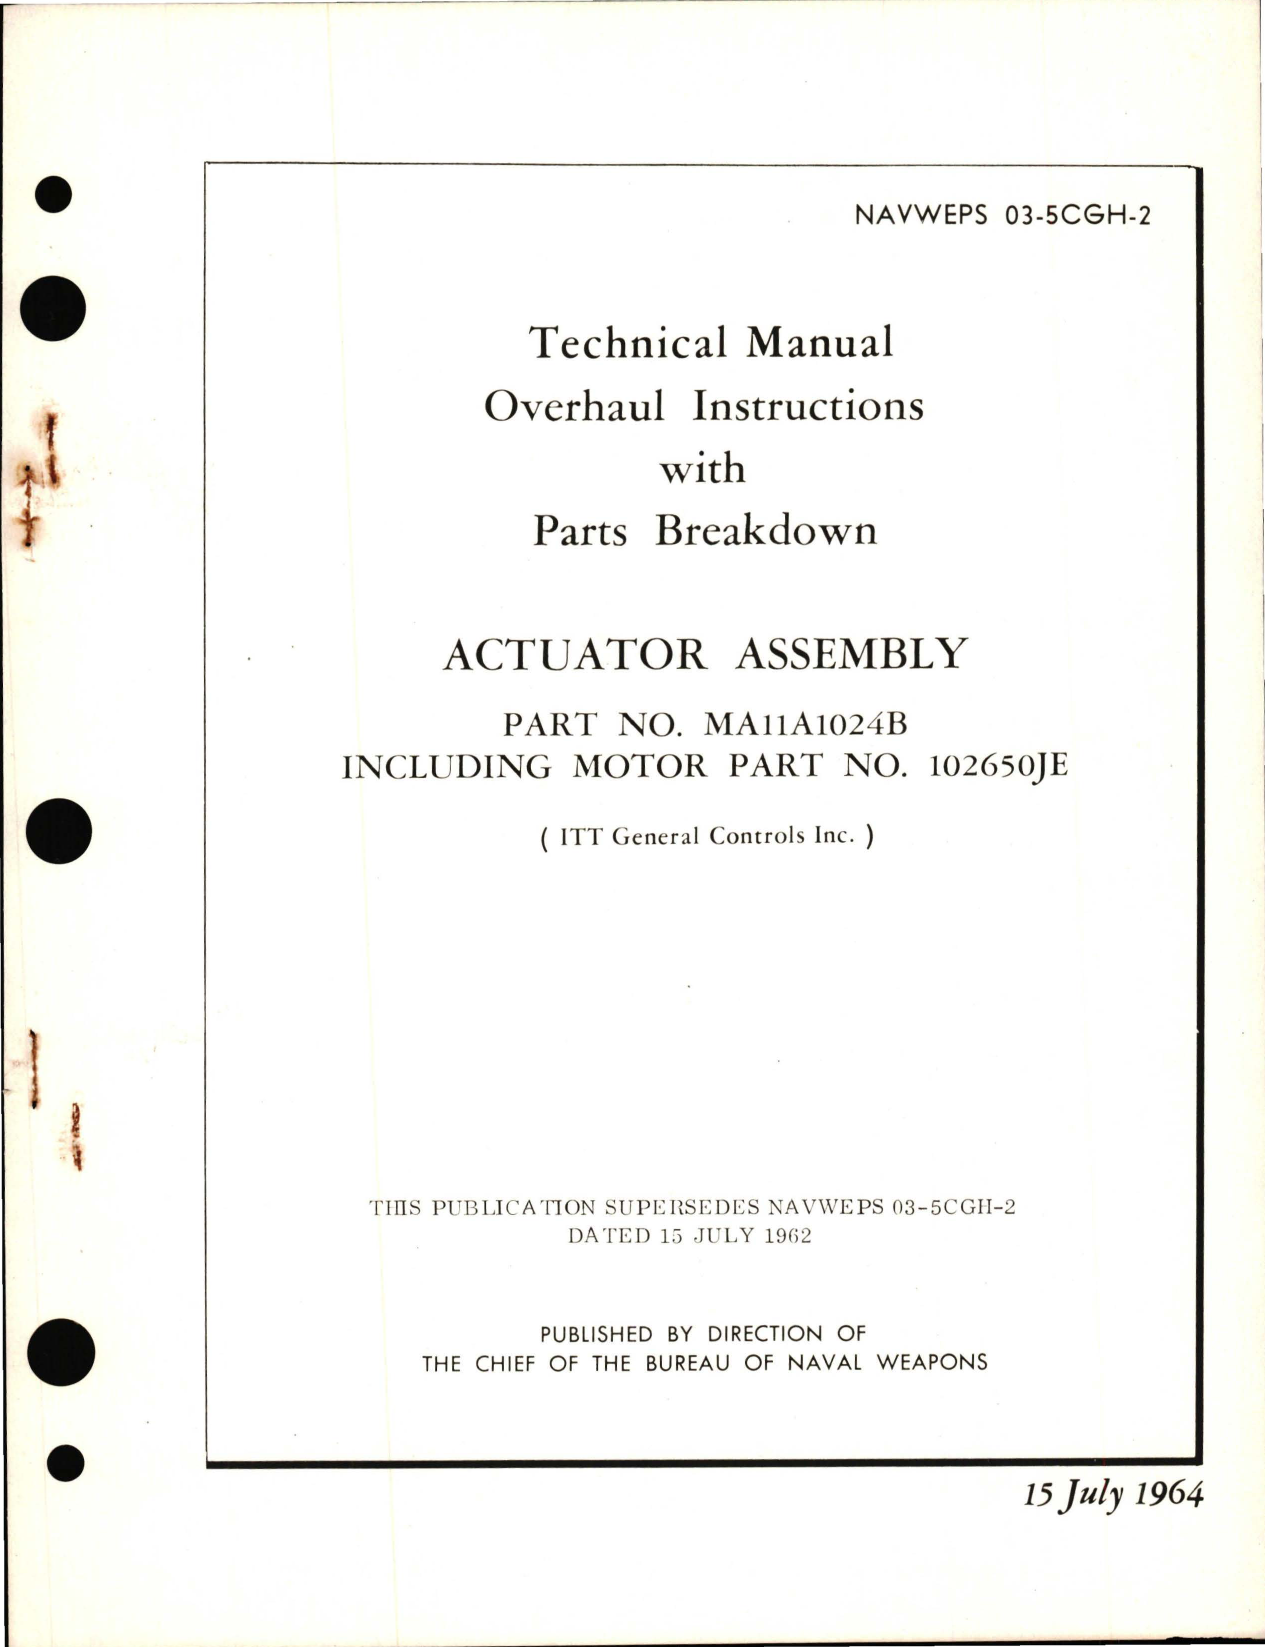 Sample page 1 from AirCorps Library document: Overhaul Instructions with Parts Breakdown for Actuator Assembly - Part MA11A1024B 